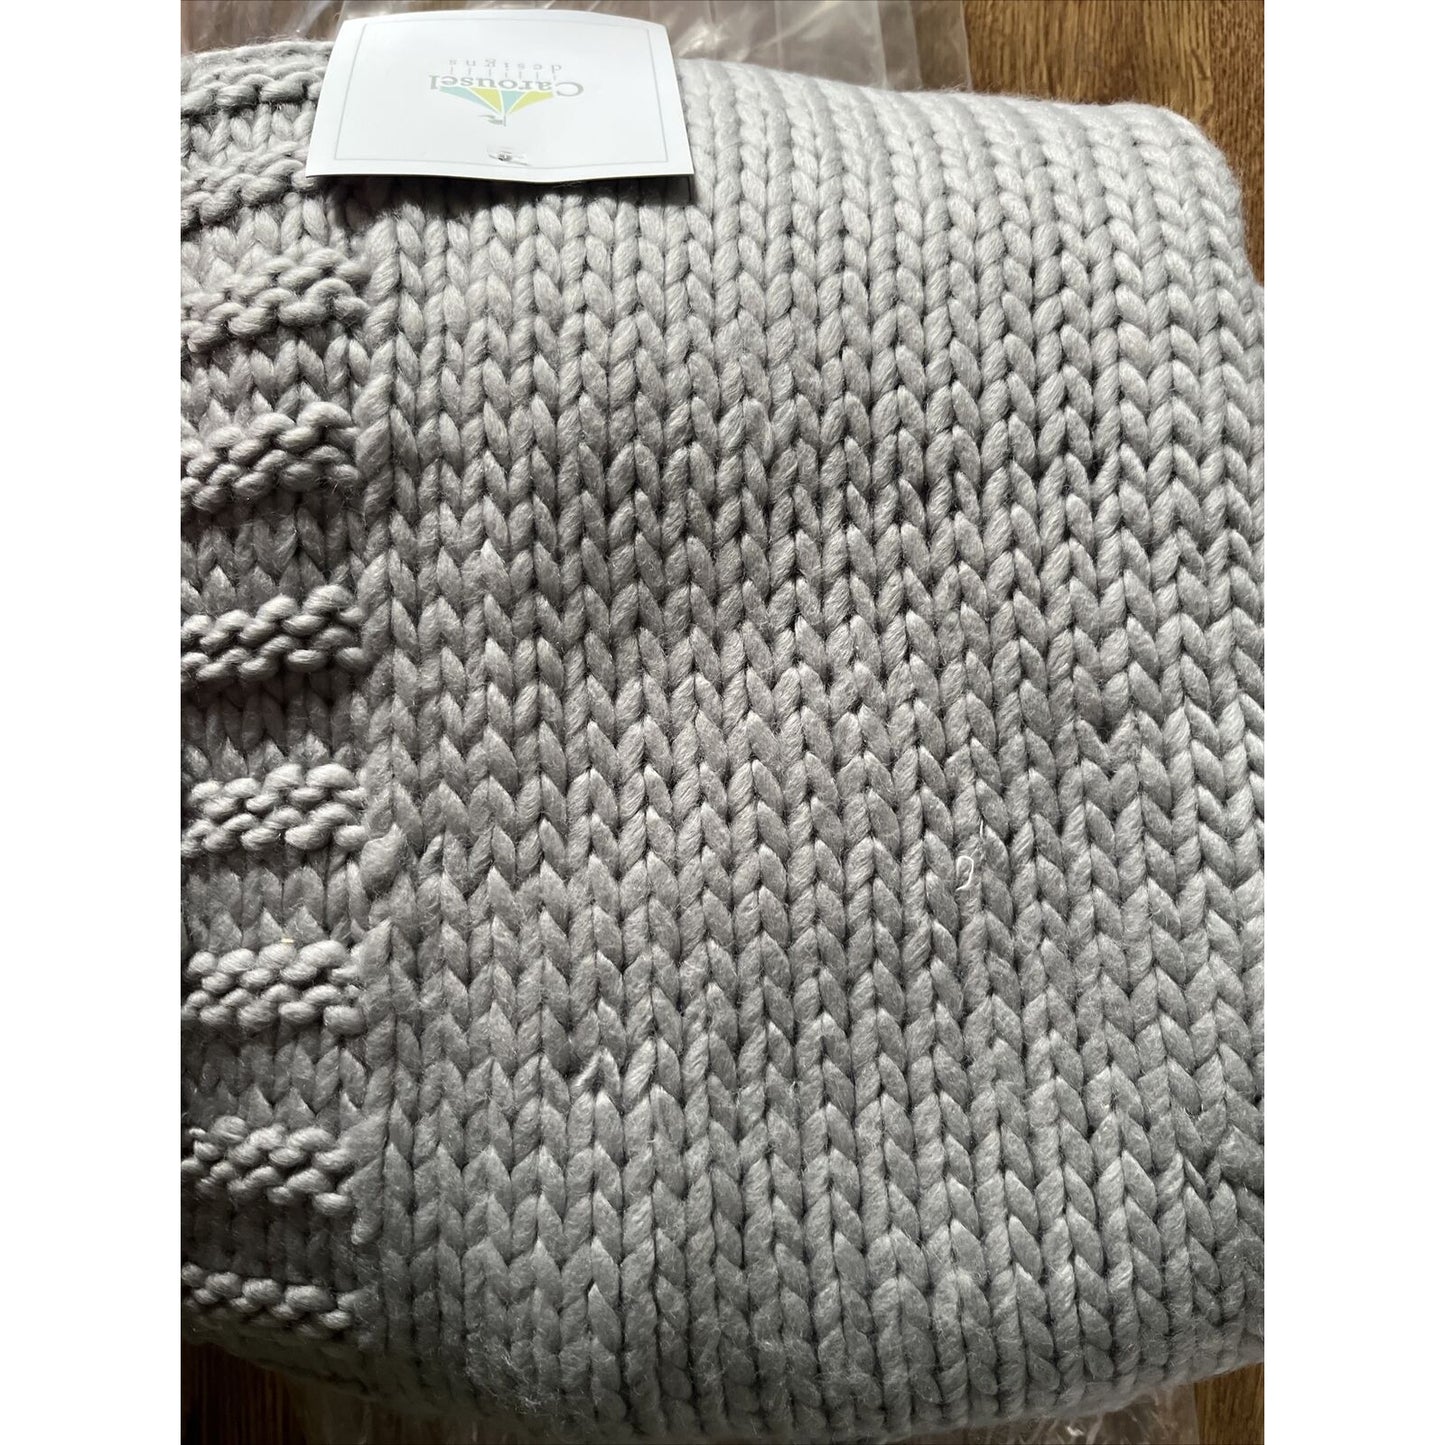 NoJo Kimberly Grant Large Gauge Cable Knit Baby Blanket in Grey Size 38" x 42"